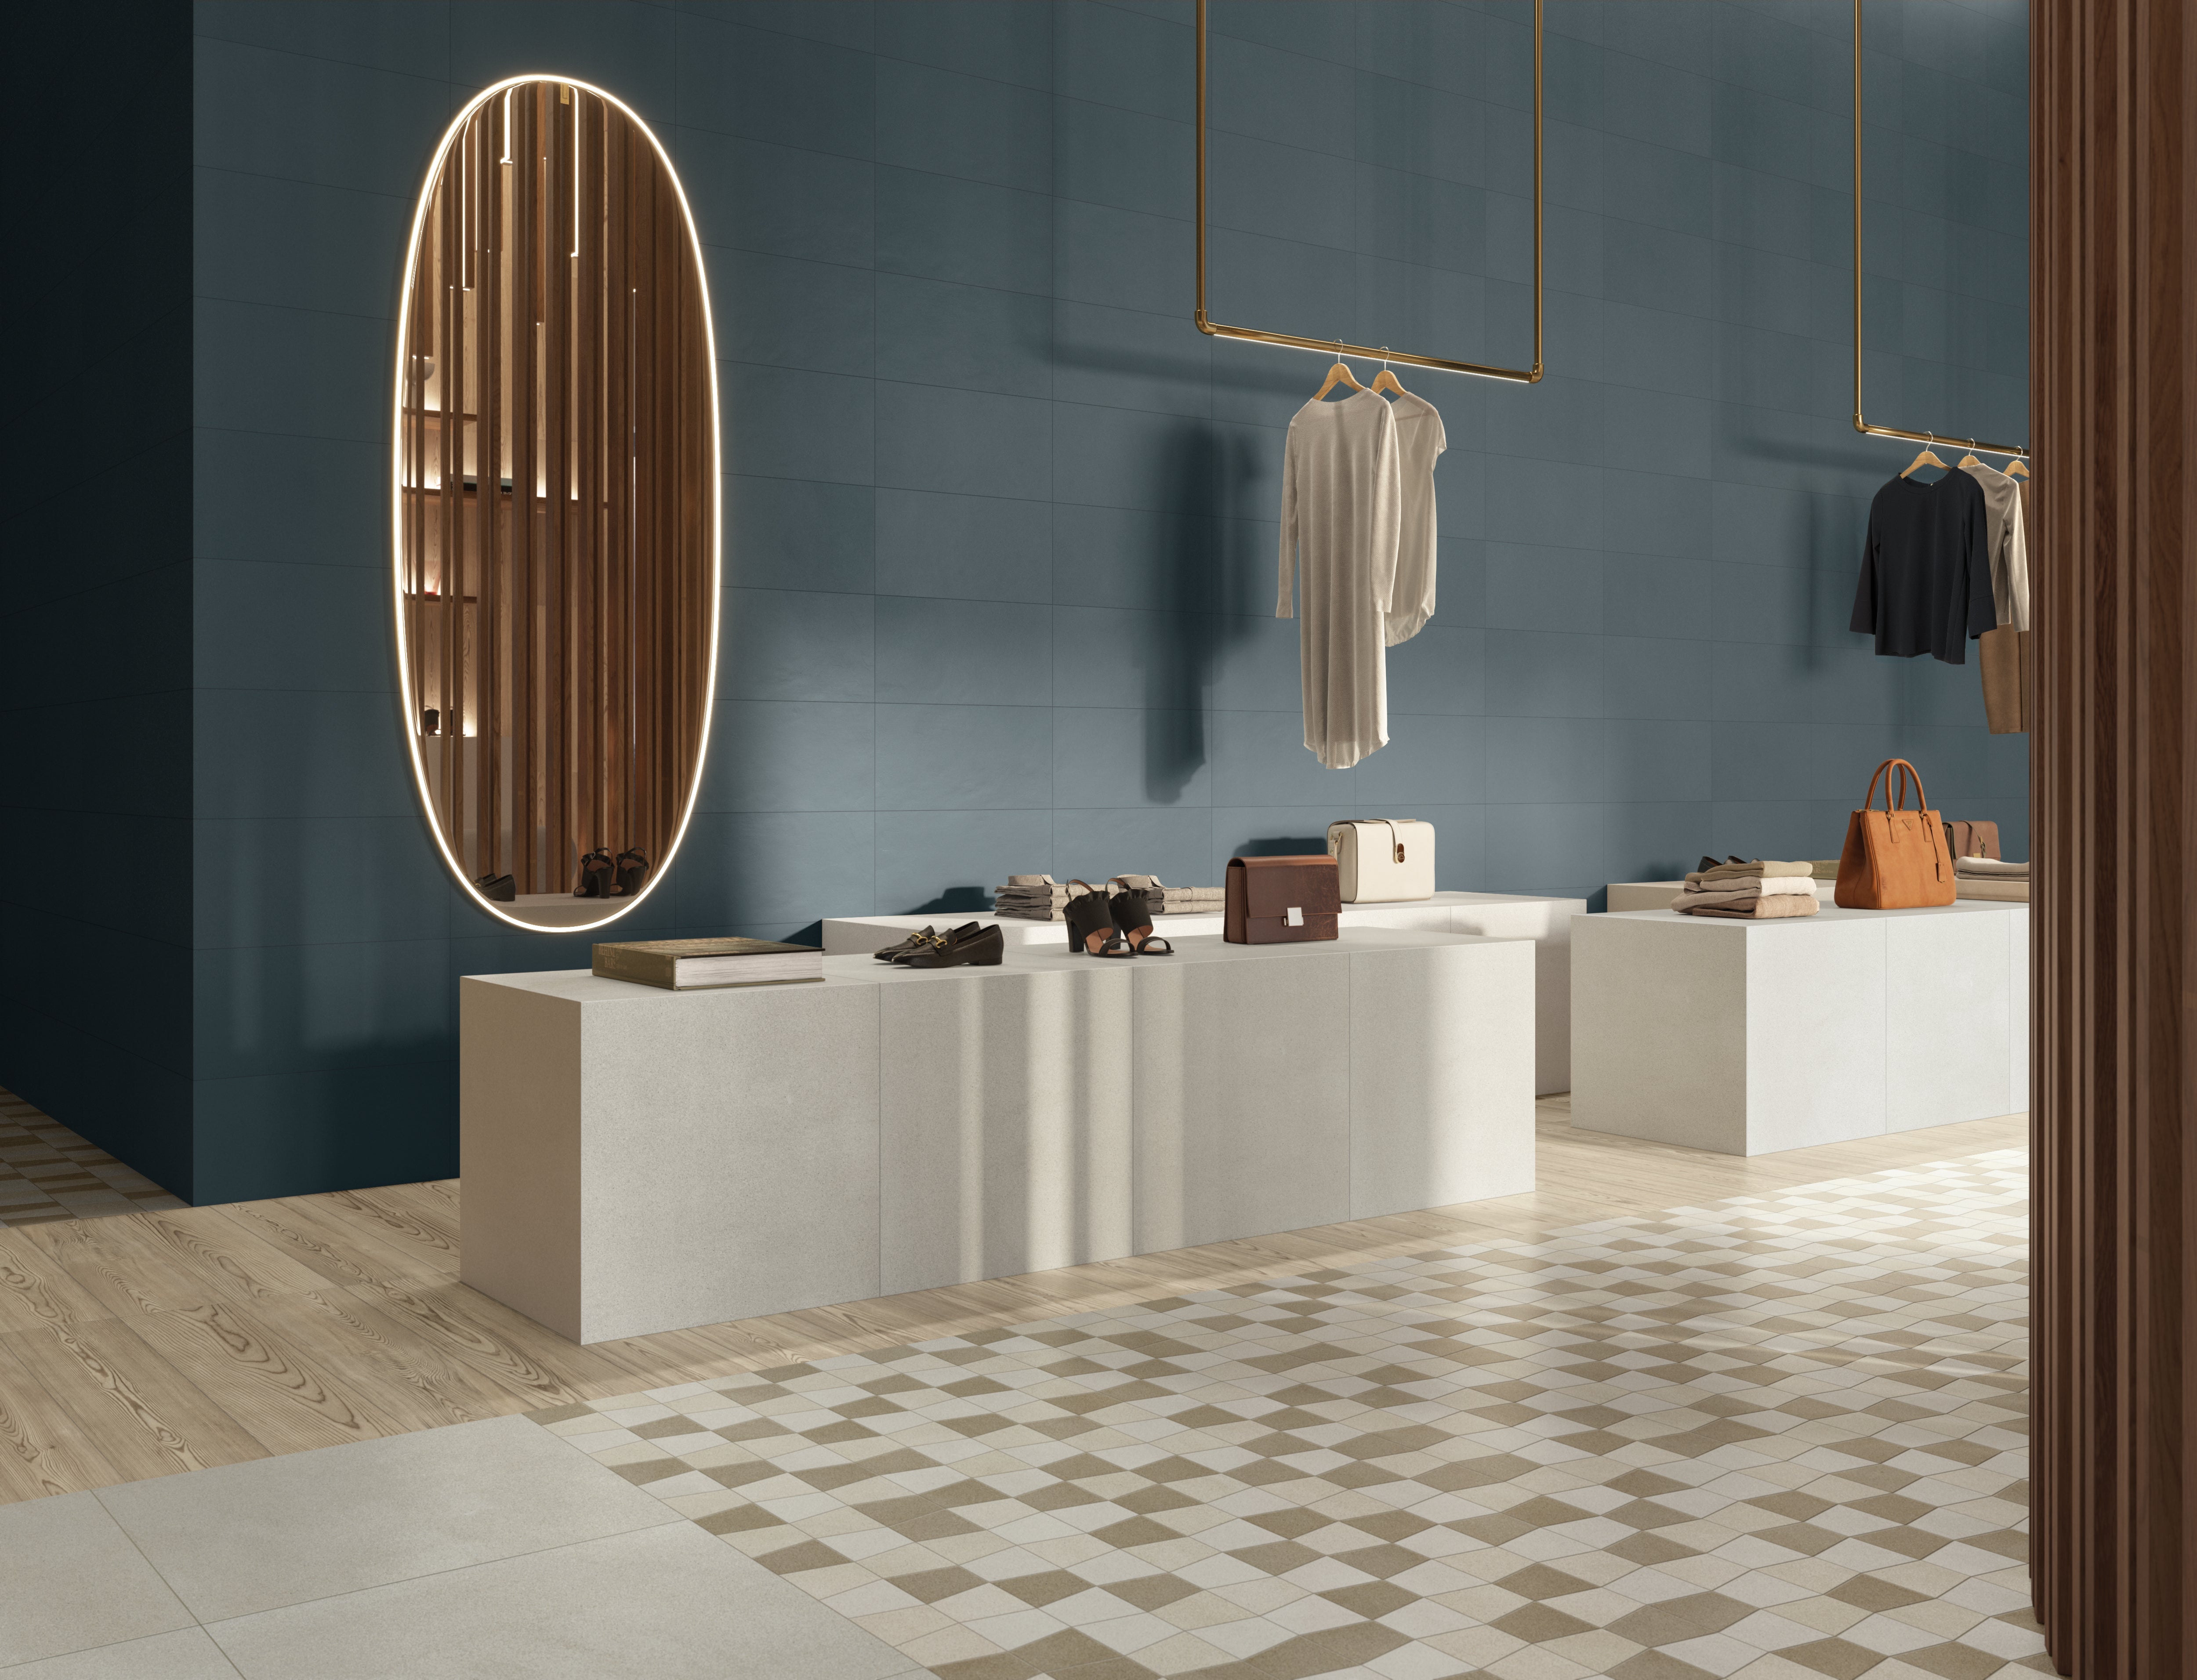 Porcelain tile collection from Surface Group featuring geometric patterns in a modern retail interior setting with elegant blue walls and wooden accents.